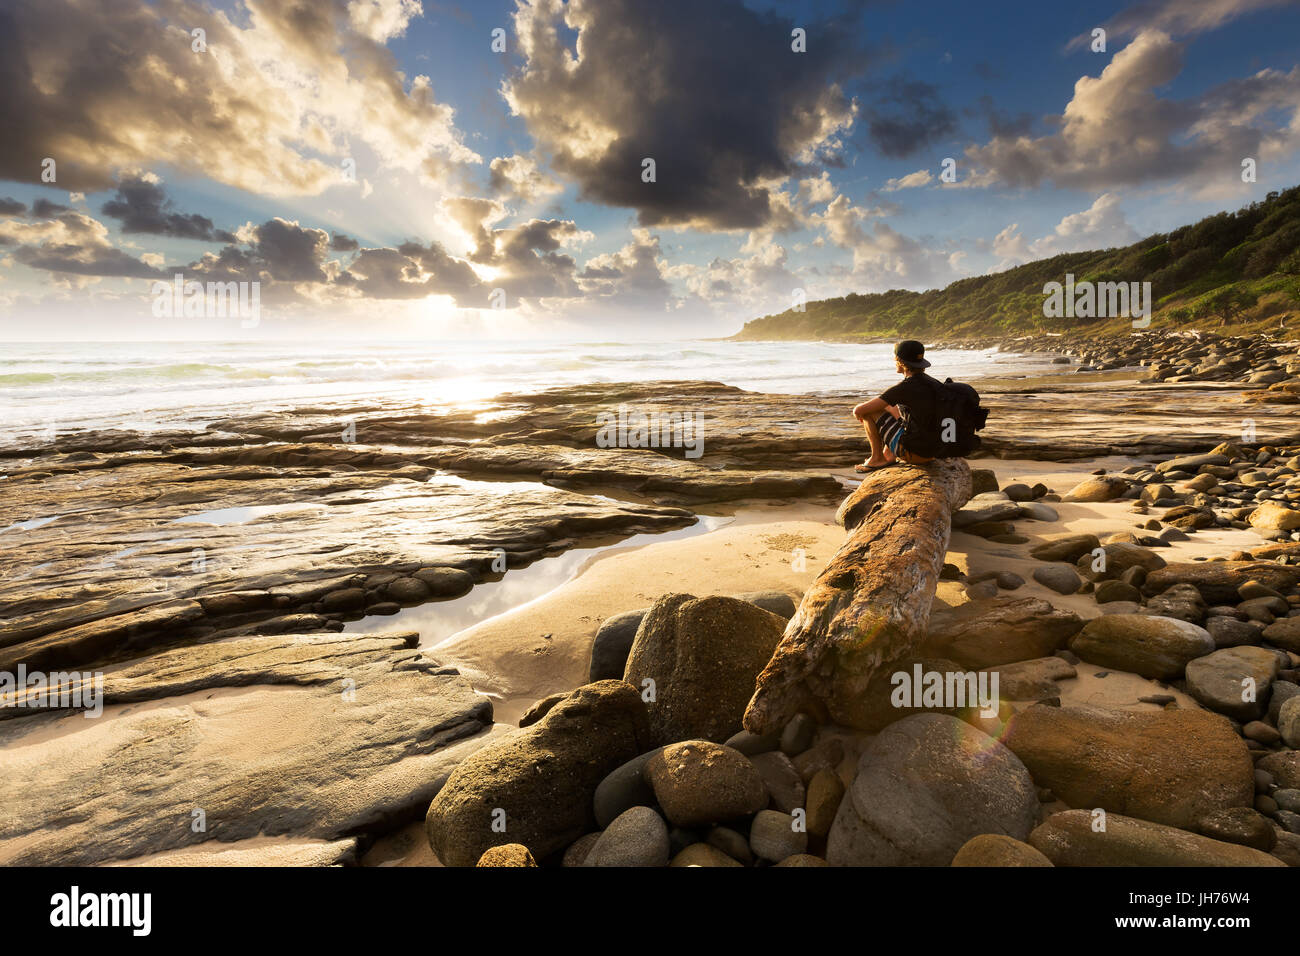 A person sits on a beautiful rocky beach and watches as the sun bursts through the clouds over the sea in this beautiful seascape. Stock Photo